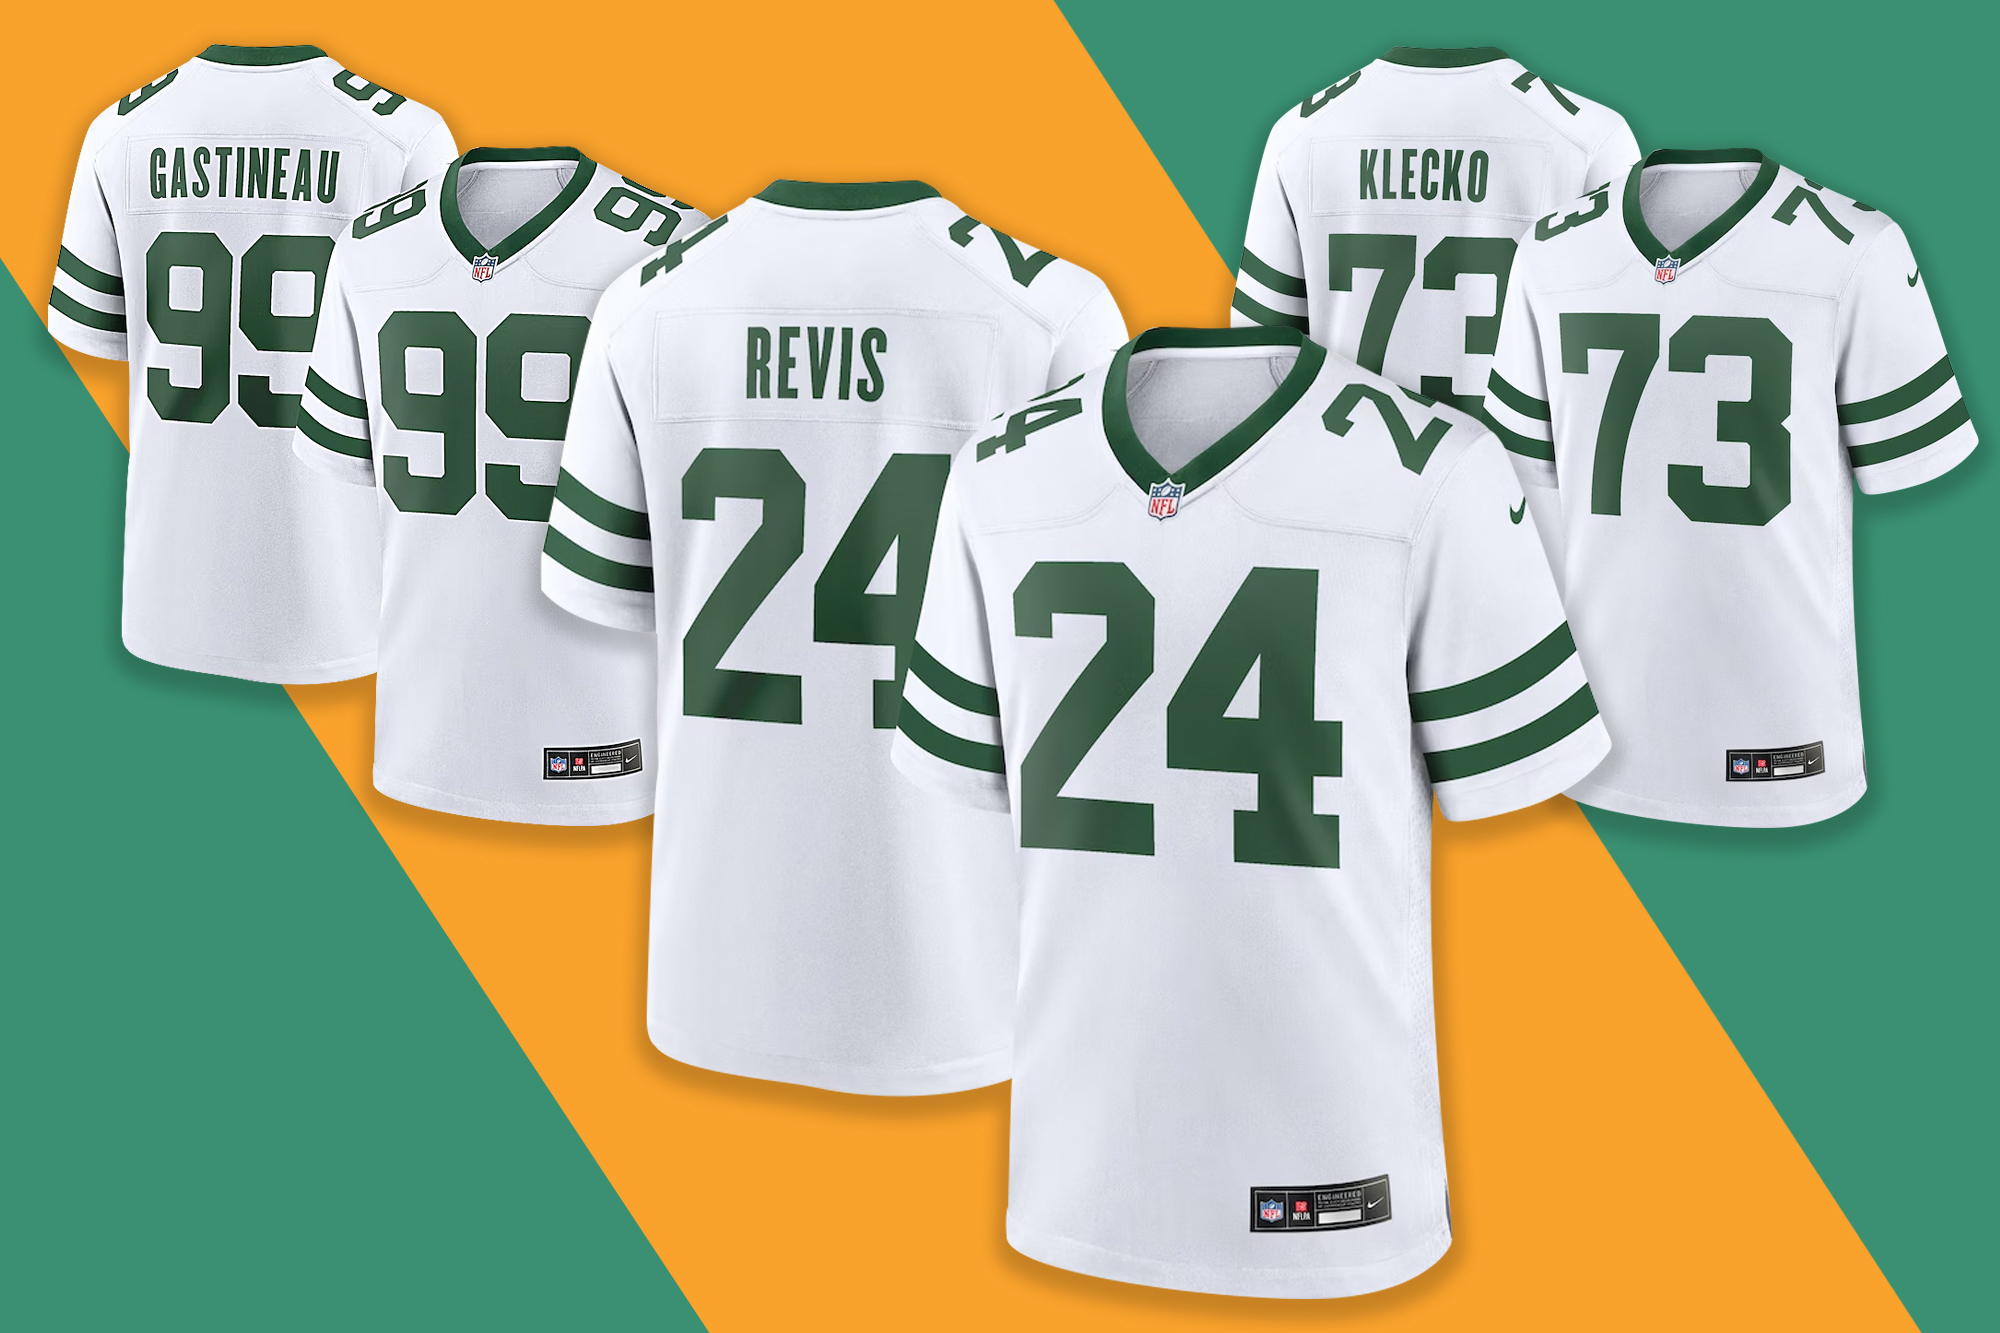 Shop new limitededition Jets throwback jerseys ahead of the 2023 season